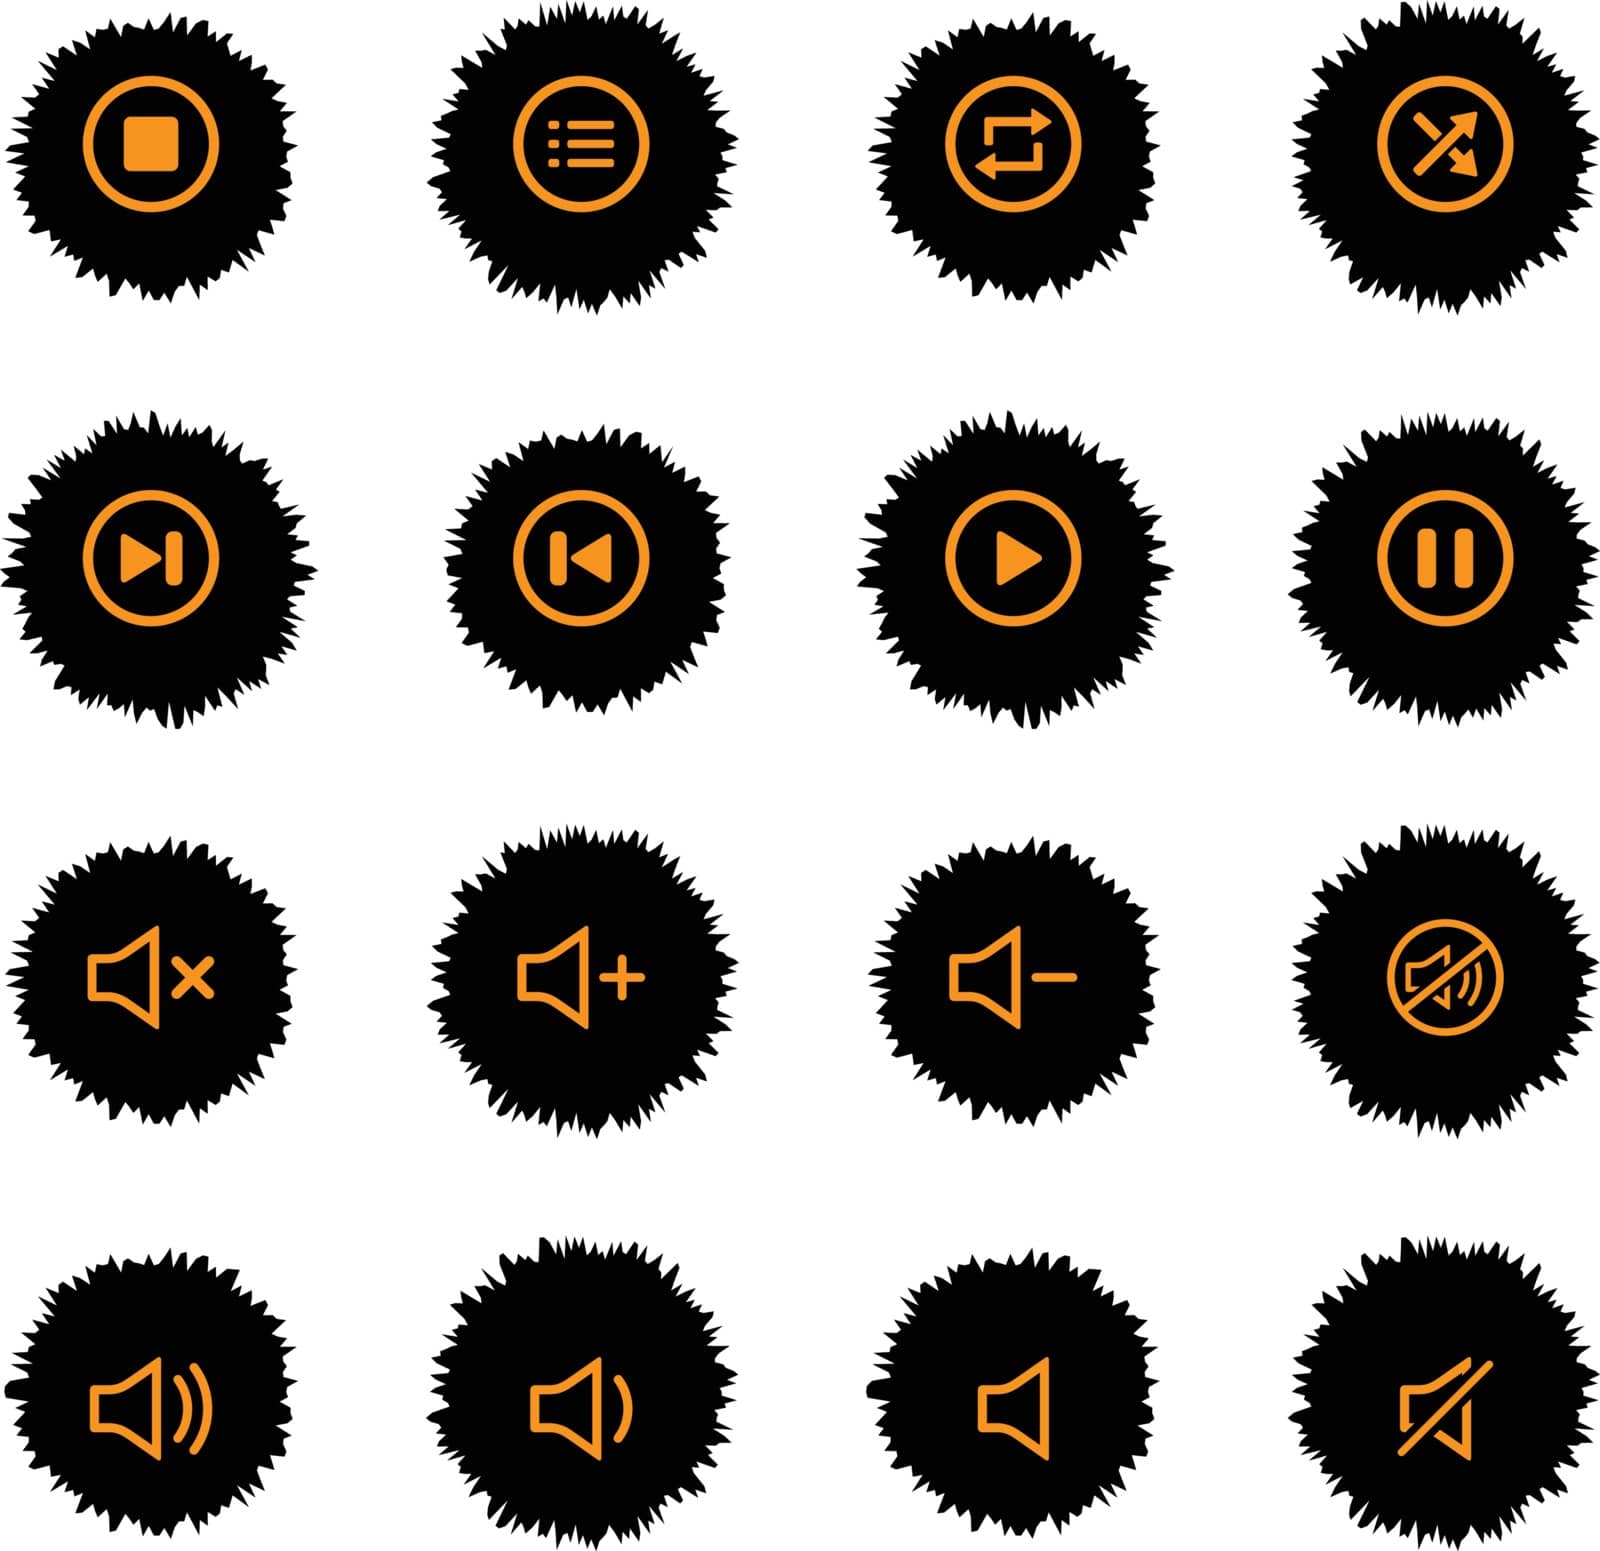 Media player vector icons for web sites and user interface